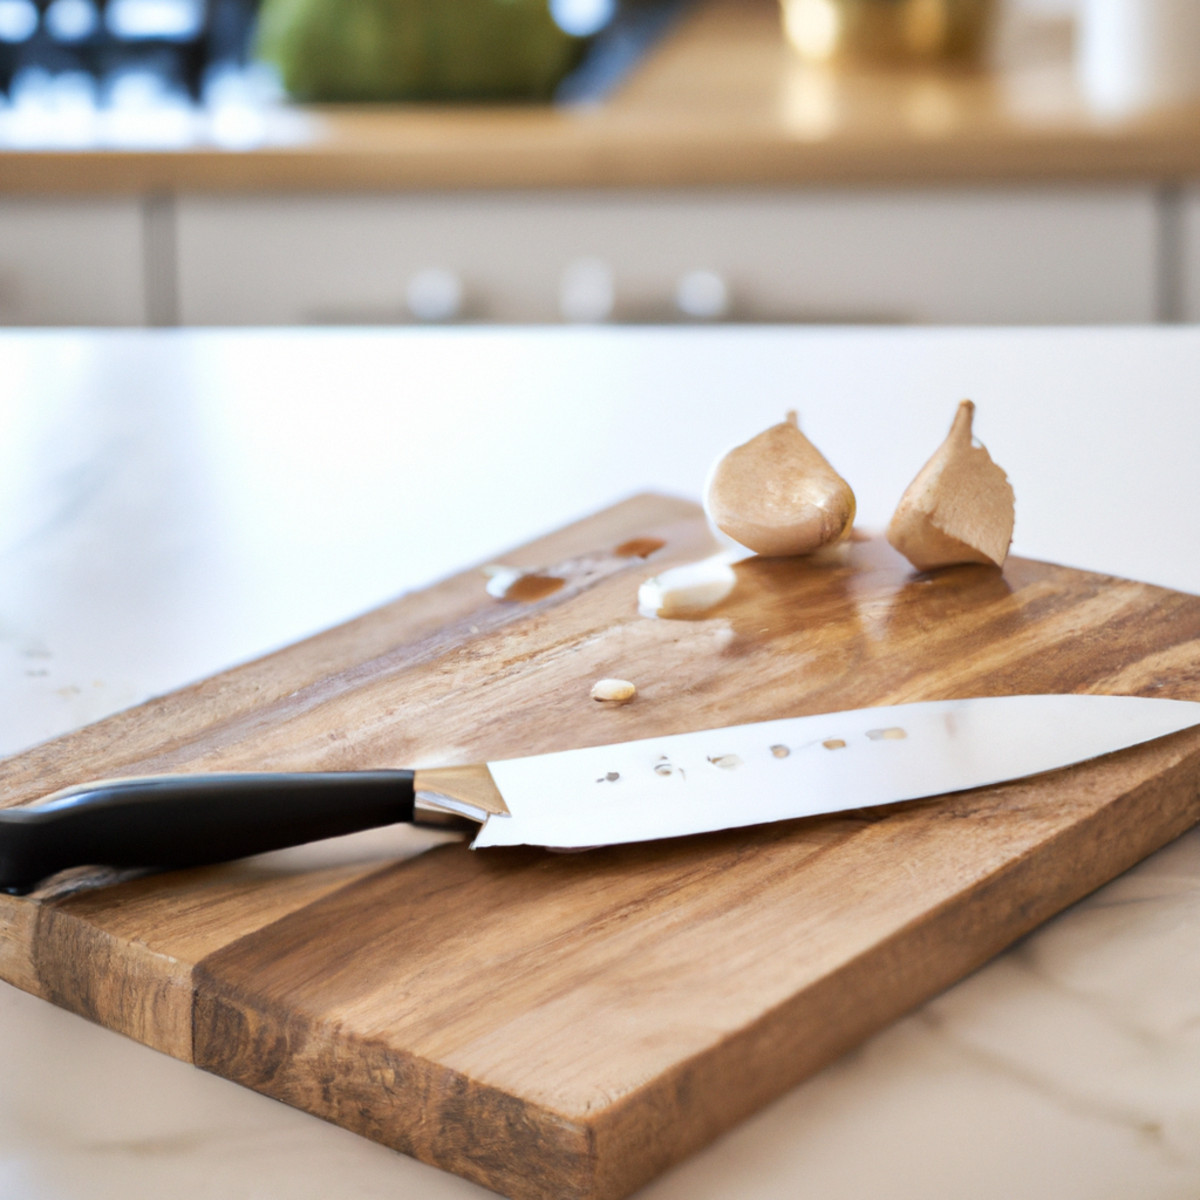 Kitchen Cleavers: Full Guide to Different Types and Uses